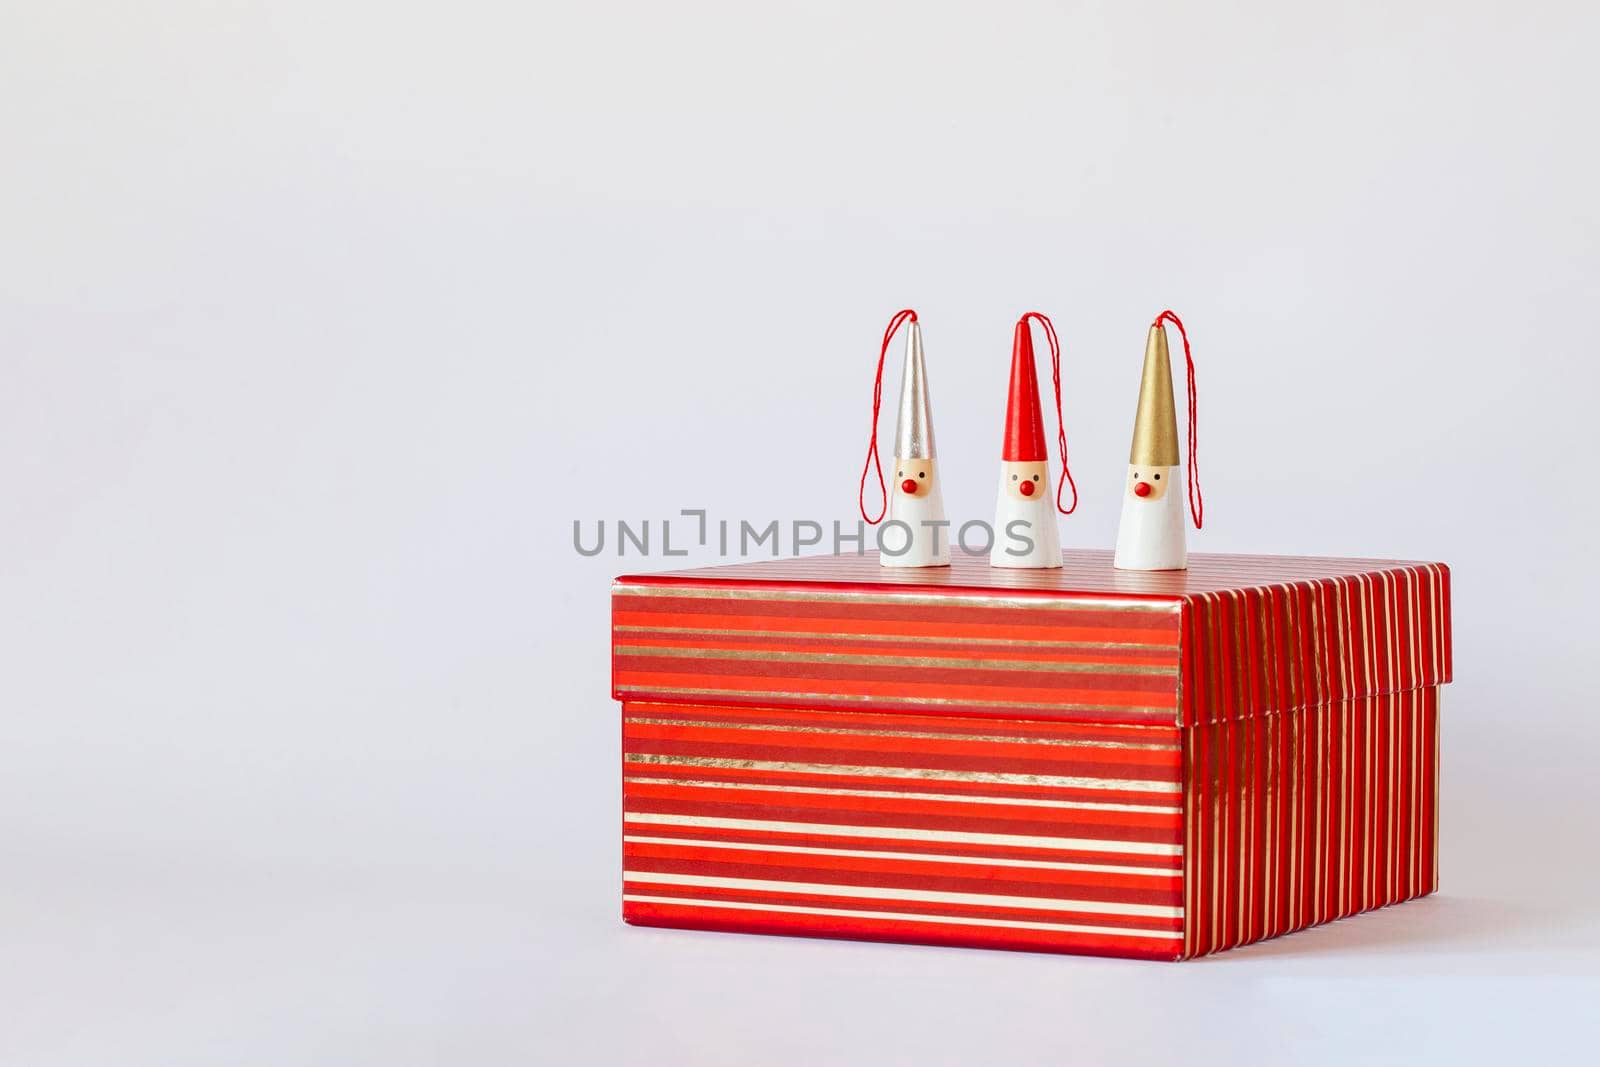 three Santa Clauses figures on a red striped gift box, white background, side view, copy space